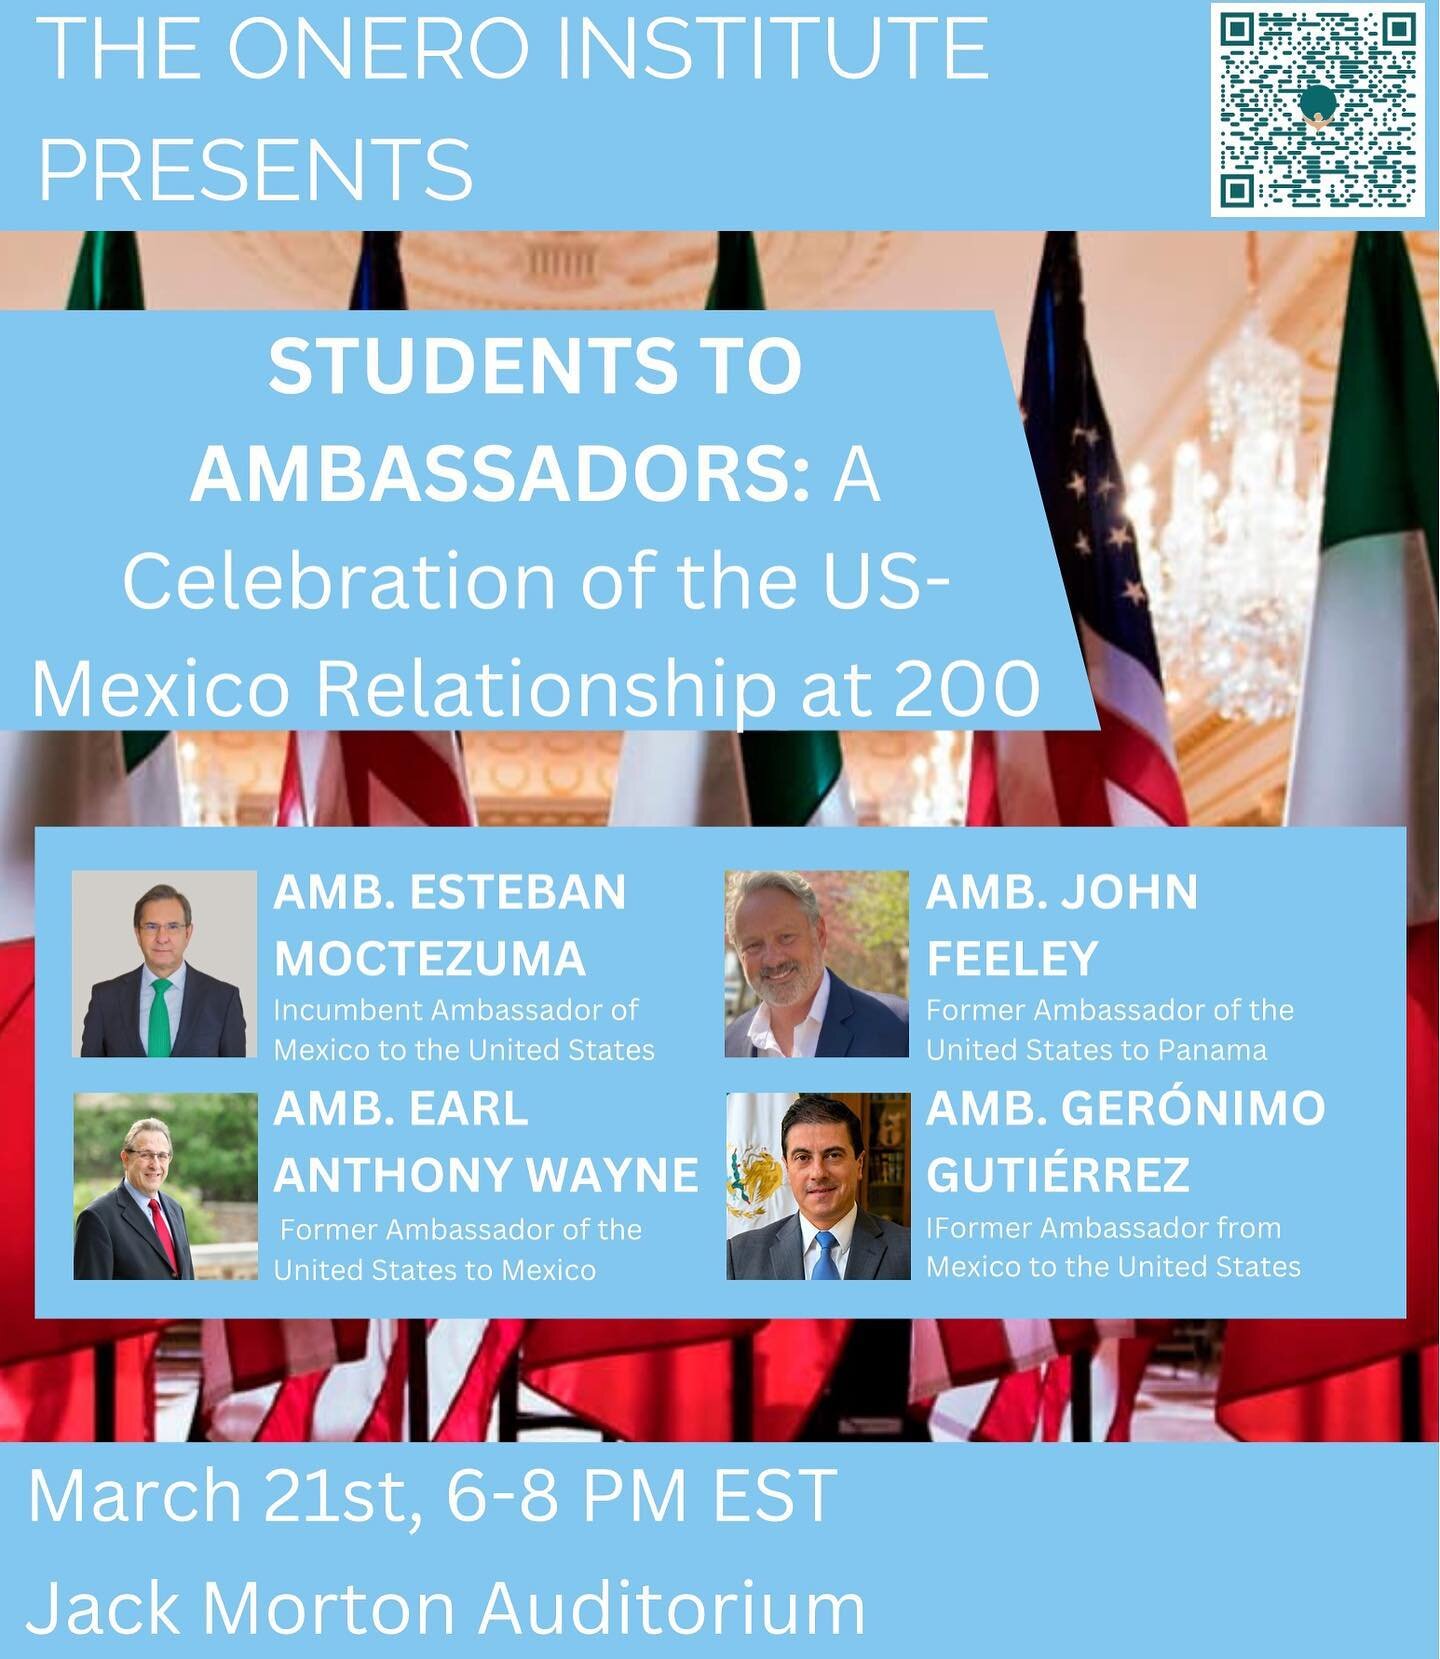 Please join us in a joint event with @latamatgw @dpe.gwu @mxgwu @embamexeua @spsboard_gw and others celebrating 200 years of Mexican-American relations! &ldquo;Students to Ambassadors: A Celebration of the U.S.-Mexico Relationship at 200&rdquo; will 